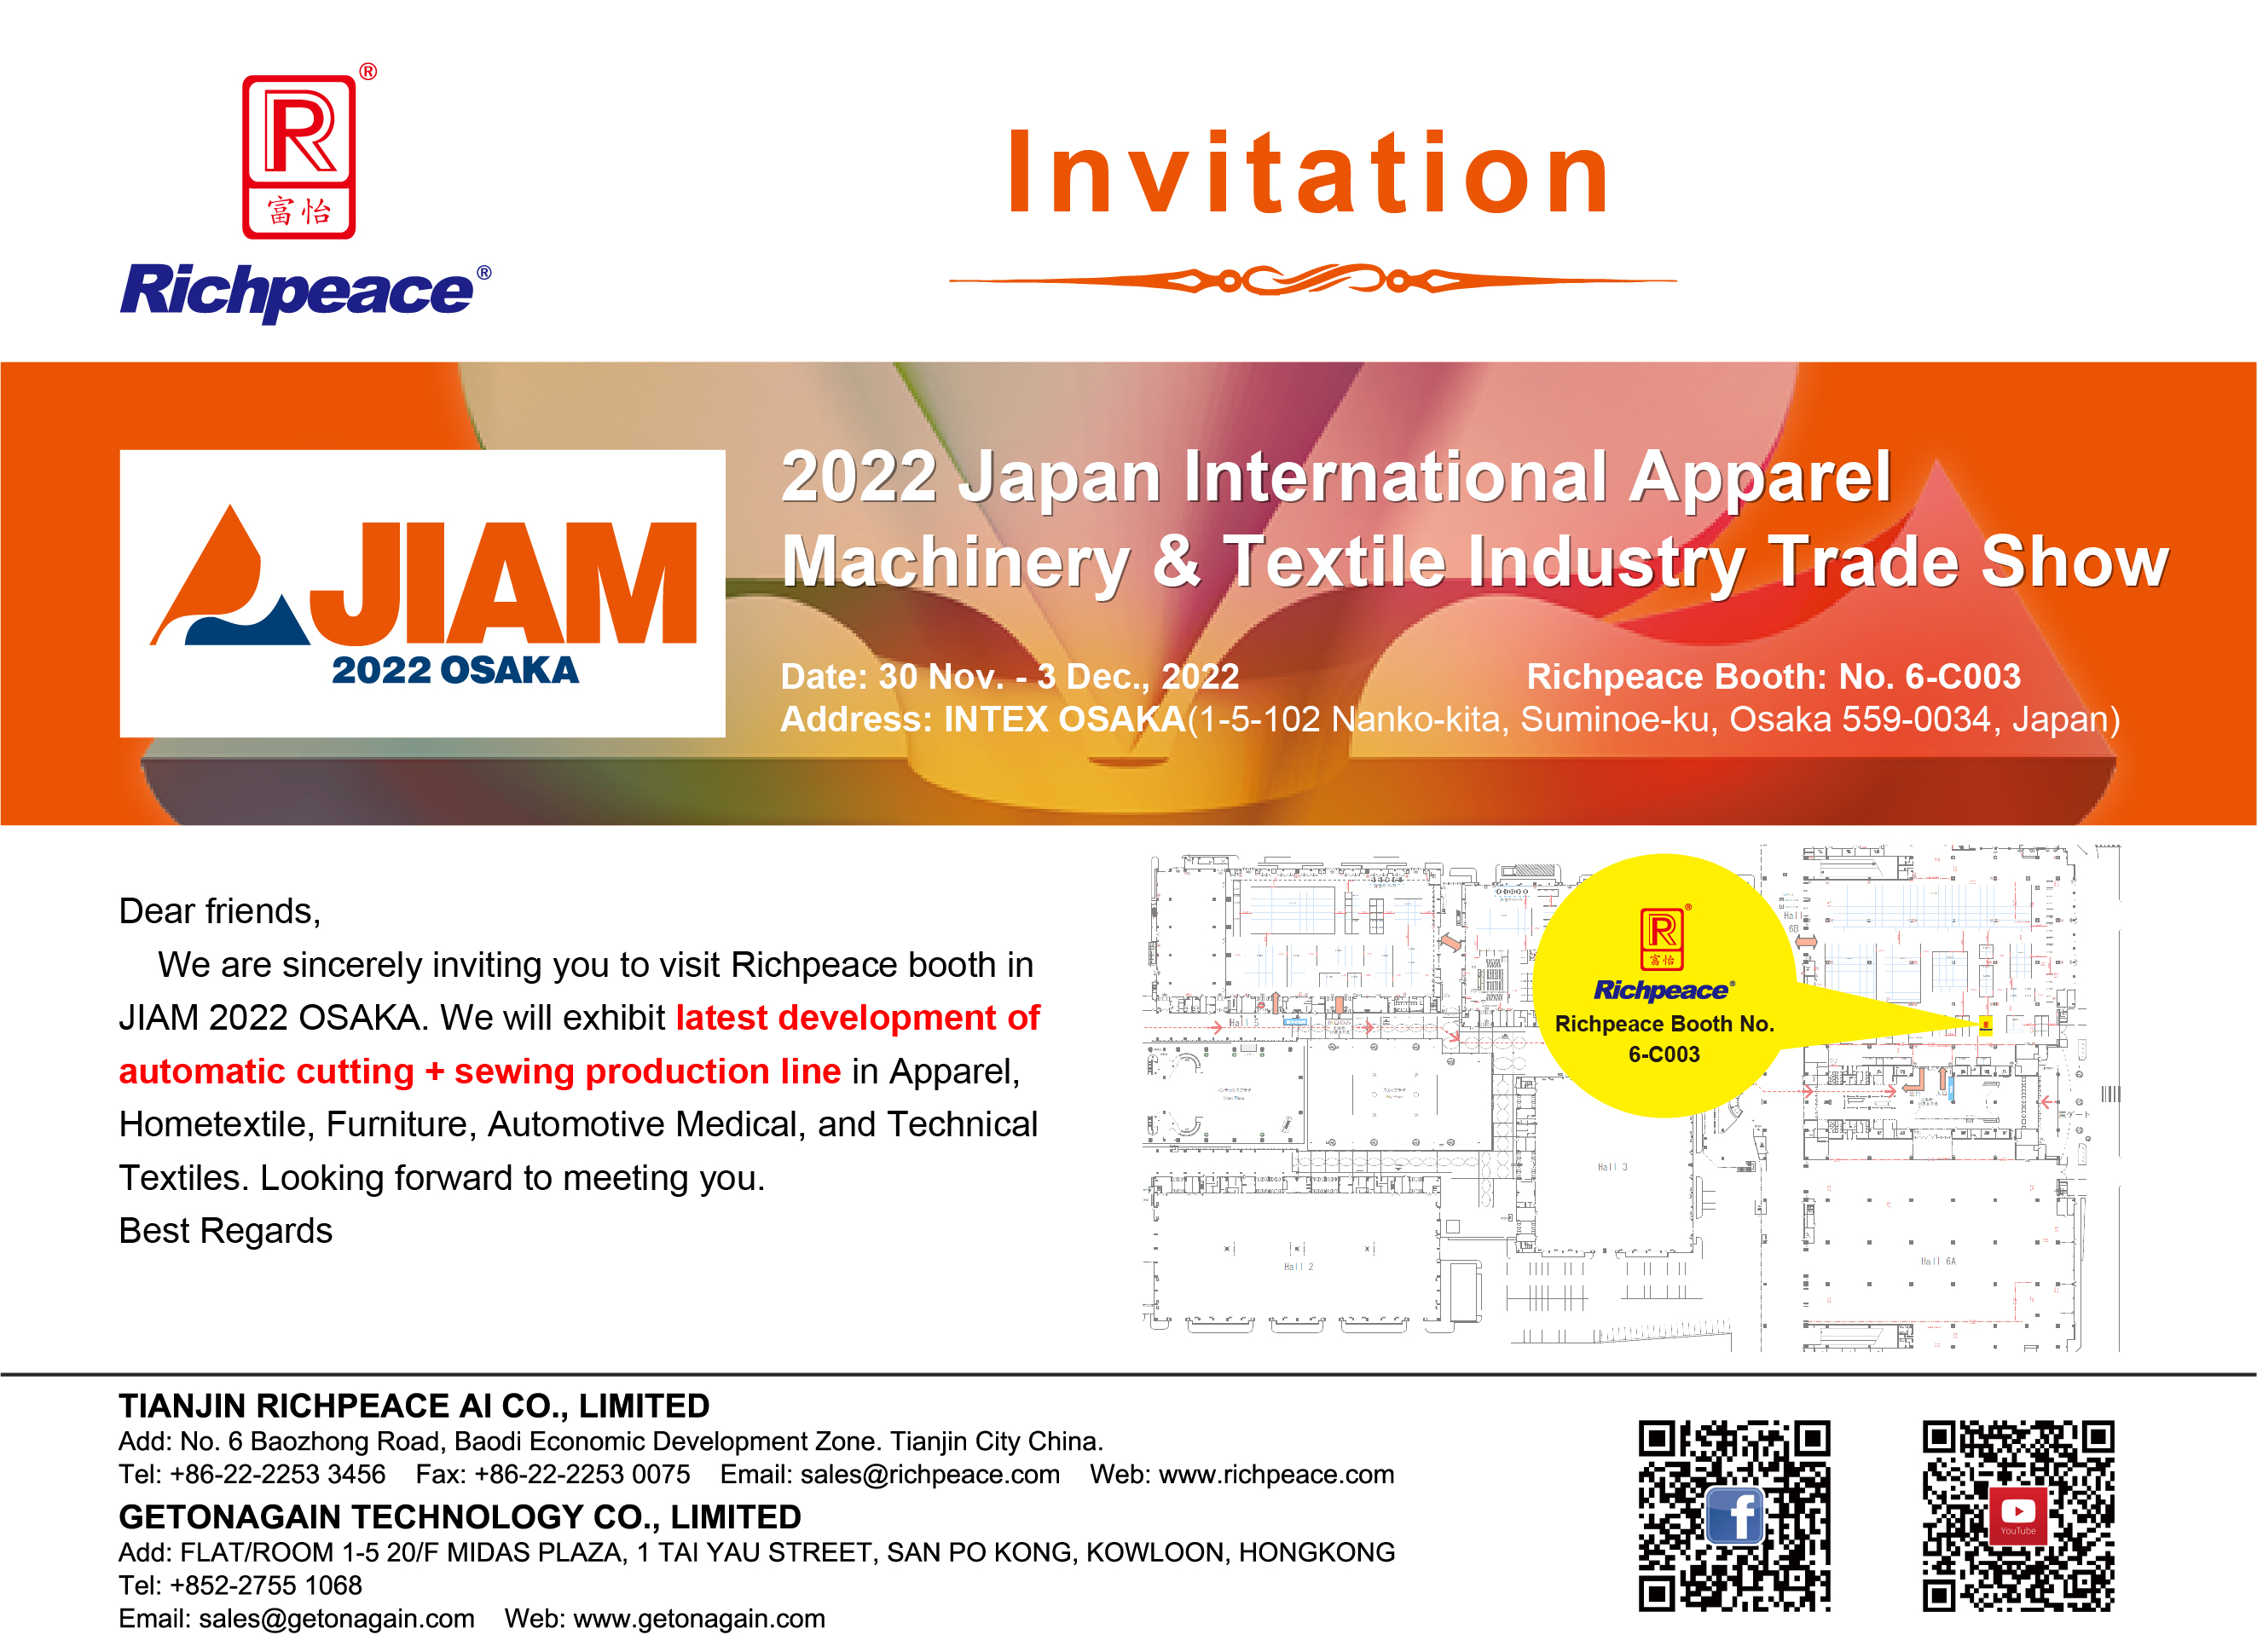 2022 Japan International Apparel Machinery & Textile Industry Trade Show